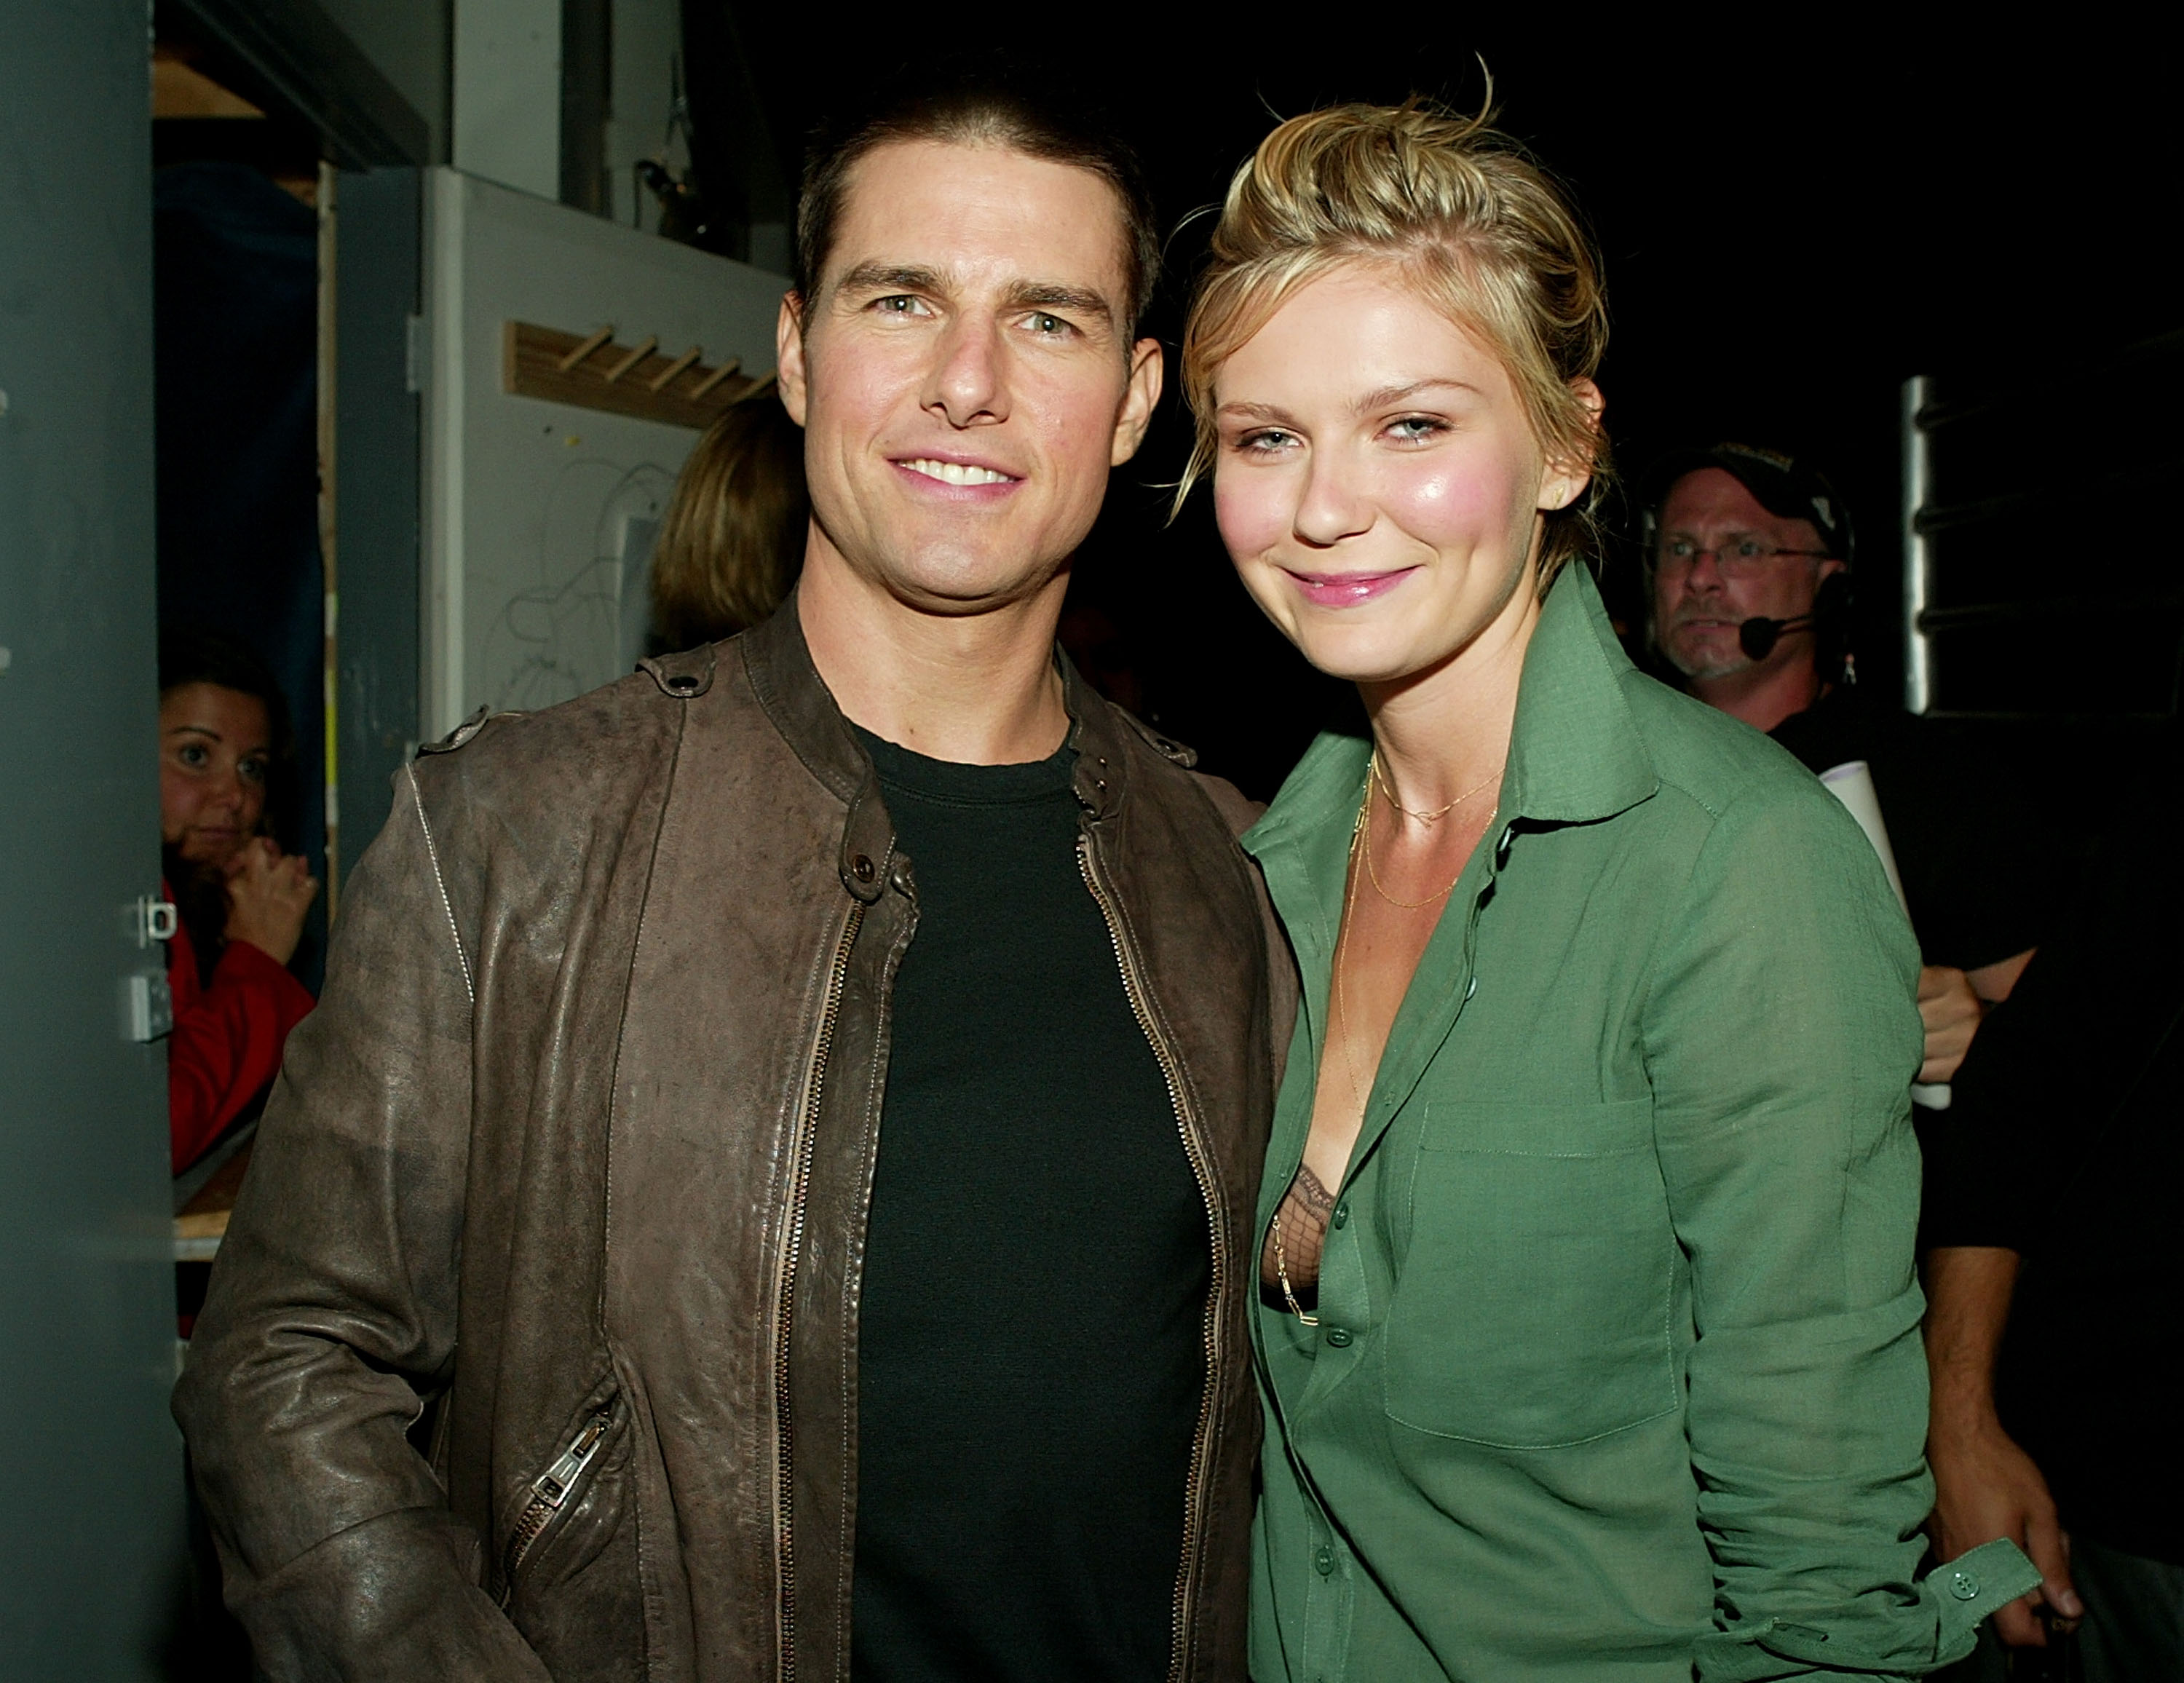 Tom Cruise and Kirsten Dunst backstage at the MTV Movie Awards on June 5, 2004, in Culver City, California | Source: Getty Images